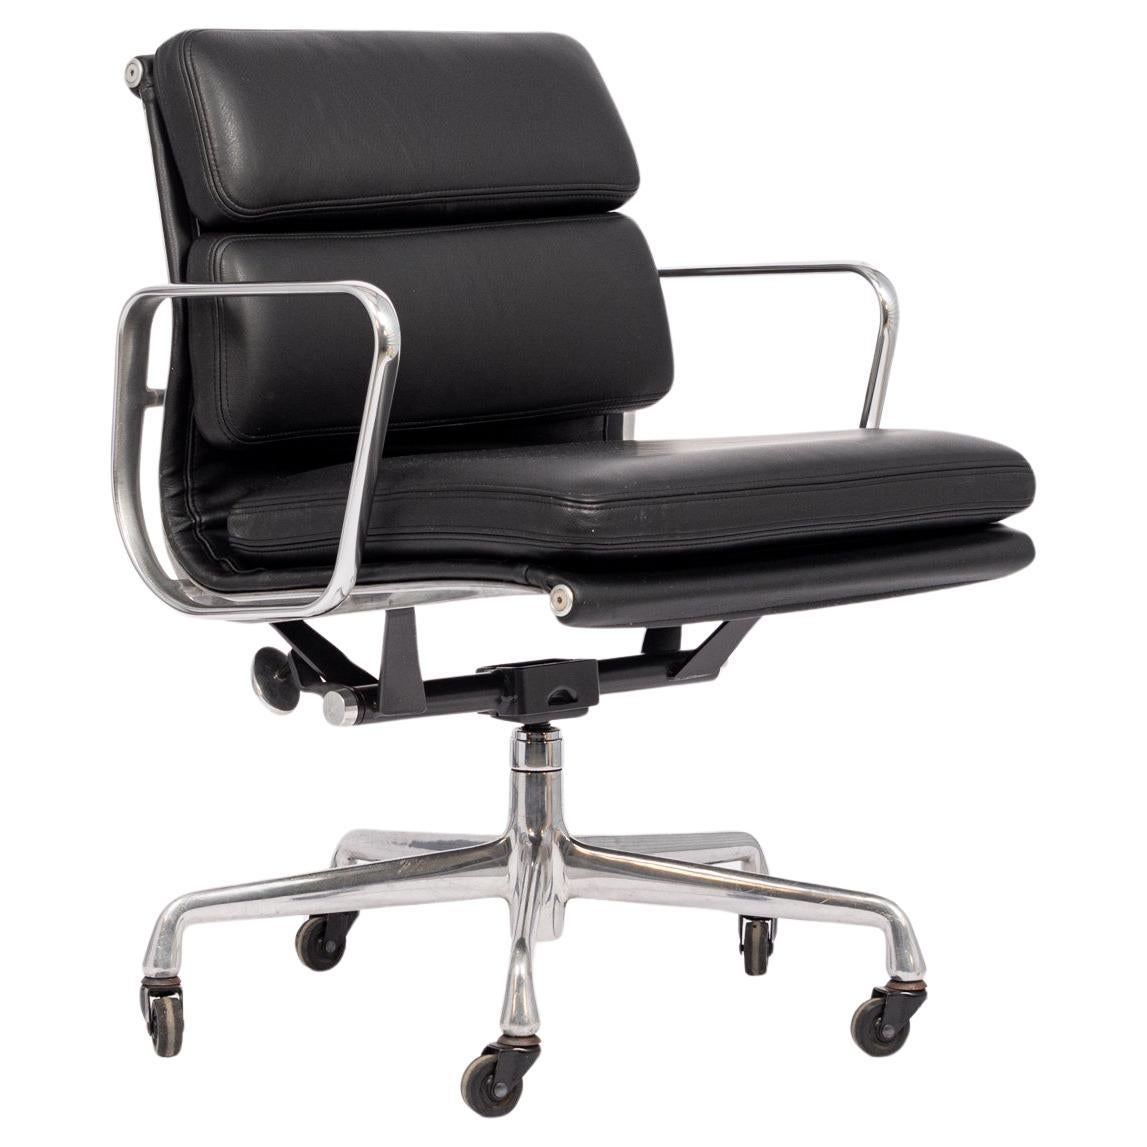 Original Mid Century Black Leather Office Chair by Eames for Herman Miller